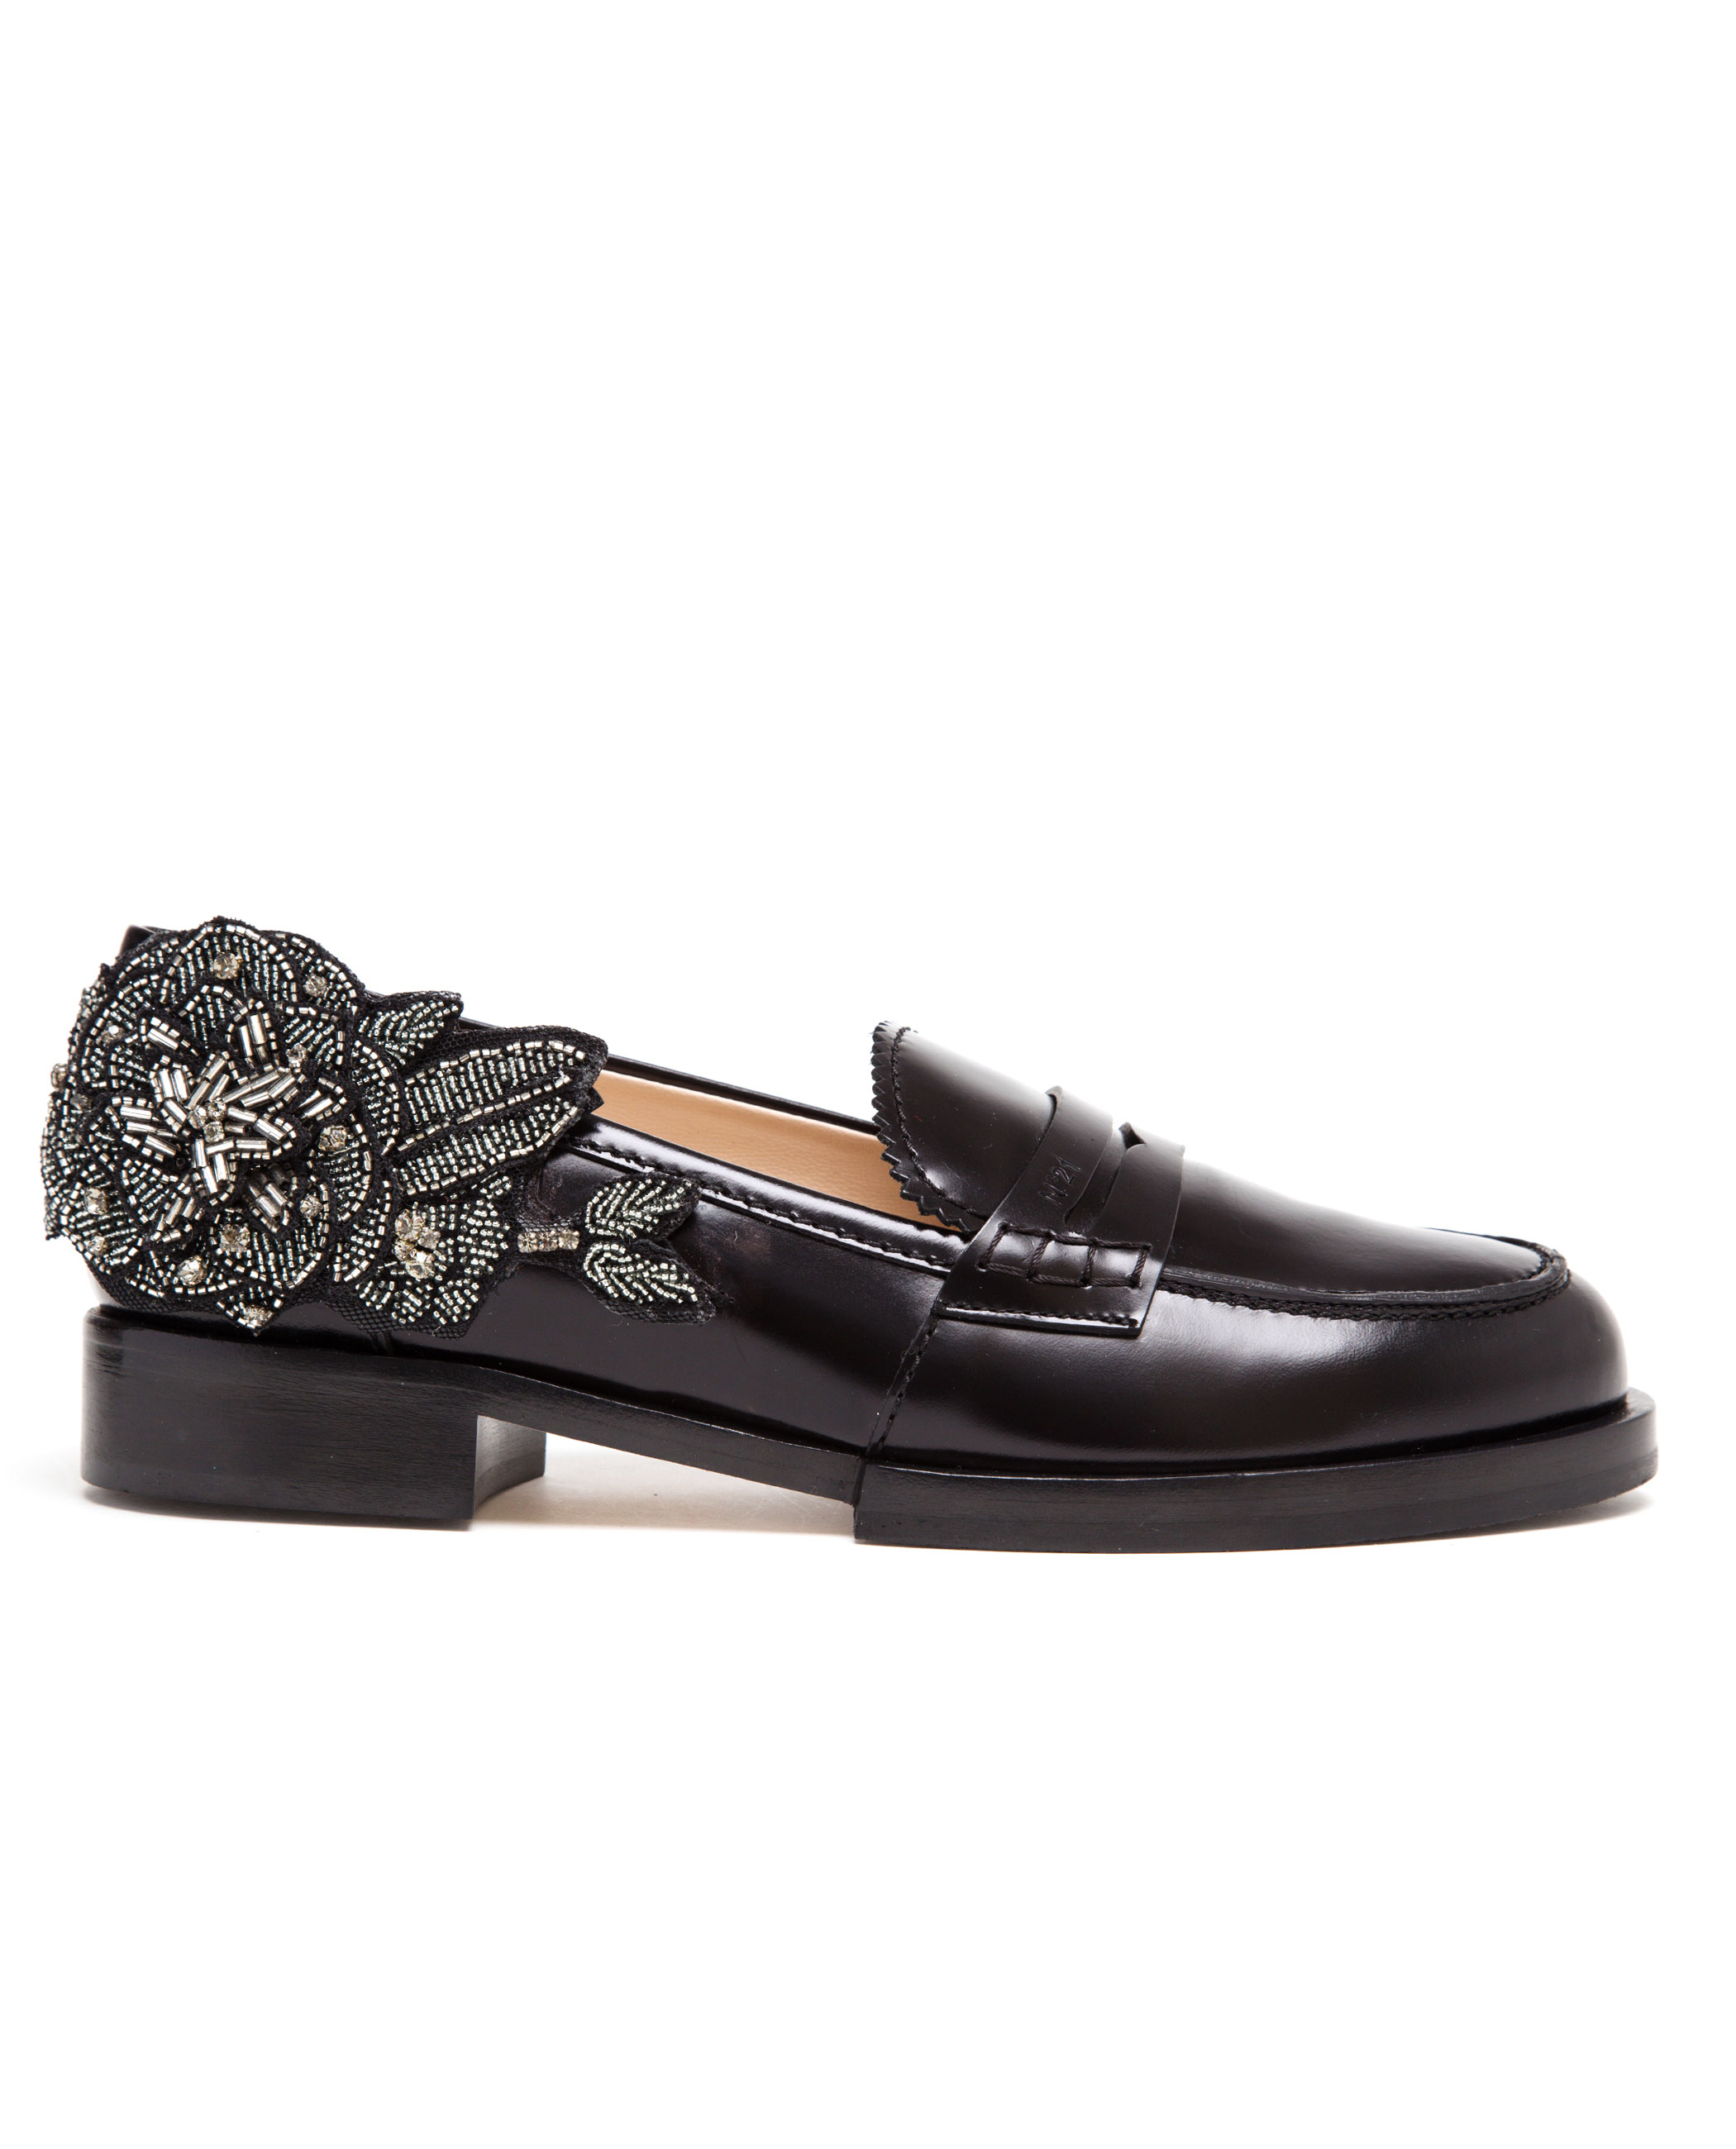 N°21 Embellished Leather Penny Loafers in Black - Lyst